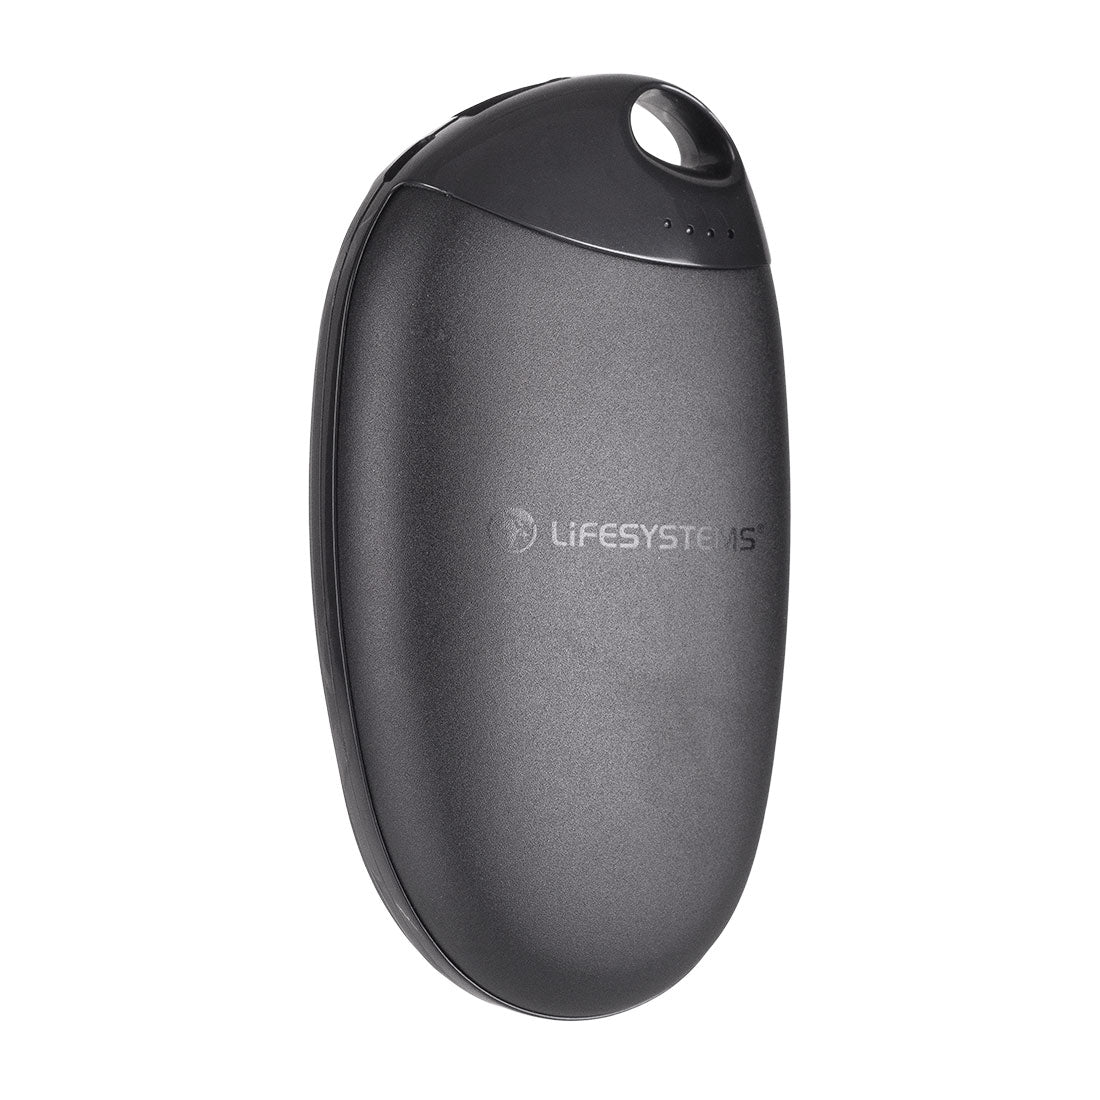 Lifesystems Reusable Hand Warmers review